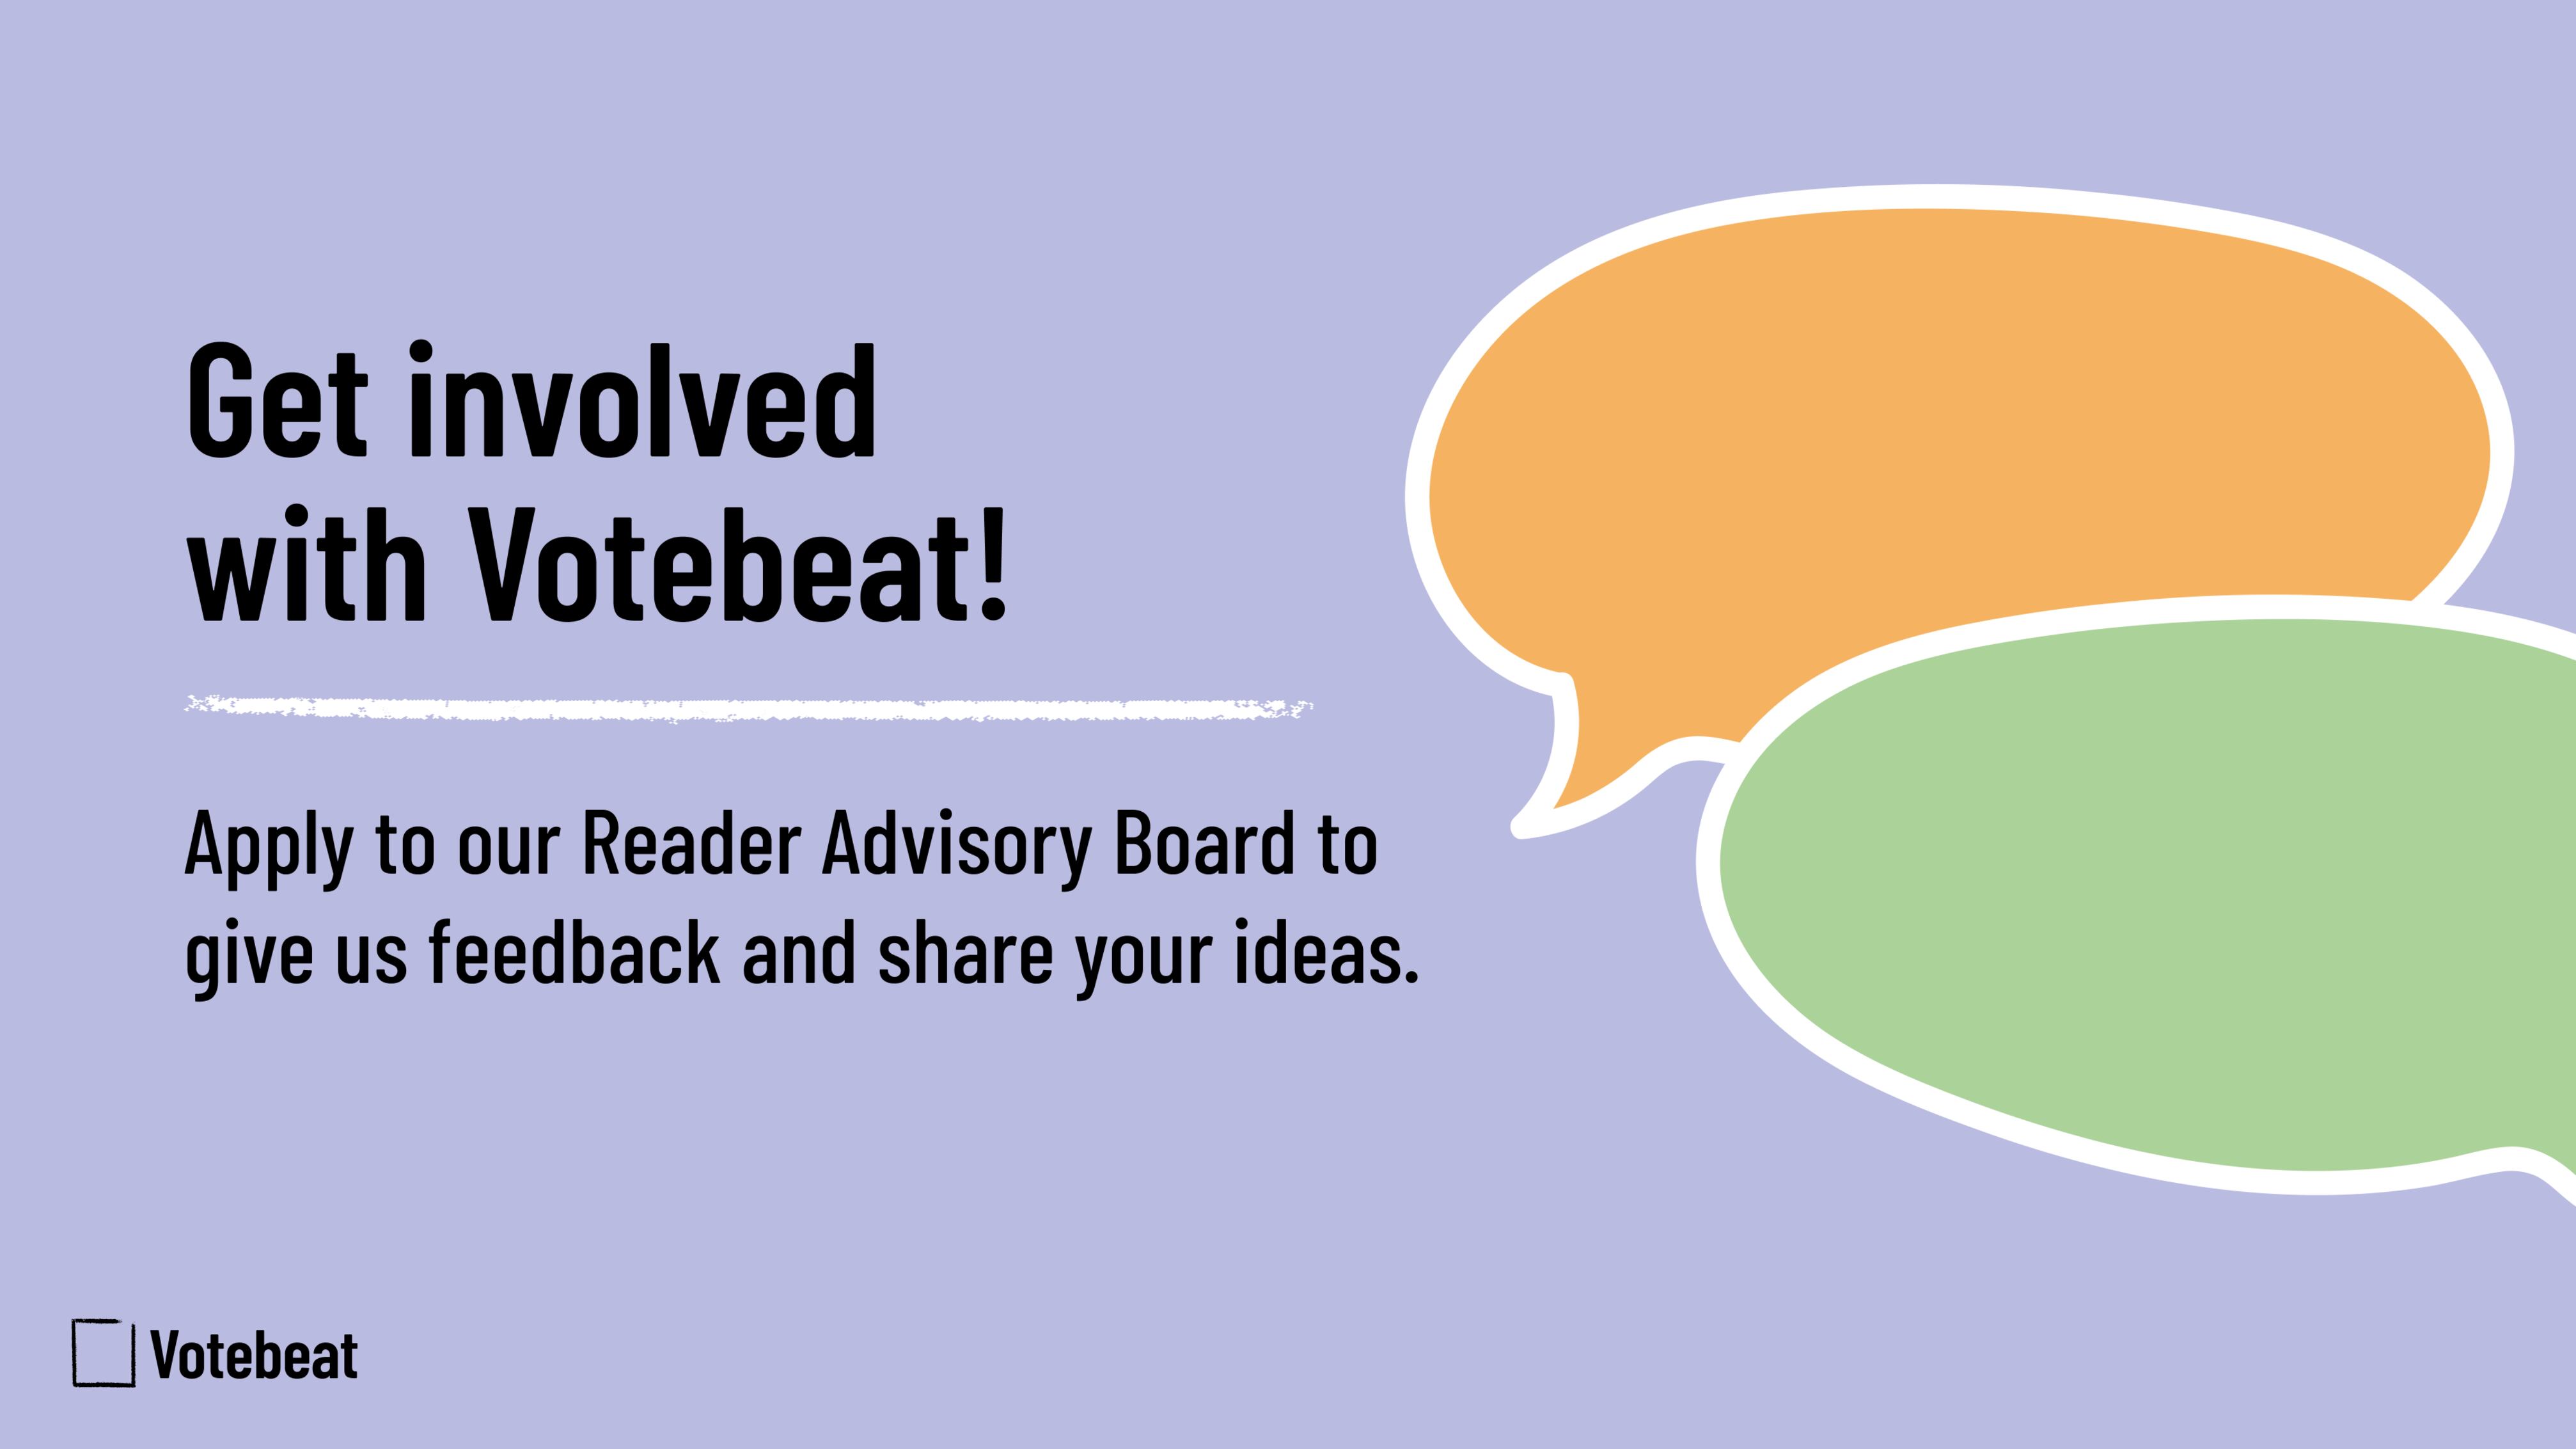 Text on a lavender purple background: “Get involved with Votebeat! Apply to our Reader Advisory Board to give us feedback and share your ideas.” To the right are two speech bubbles slightly overlappping each other, with green on top and orange undern